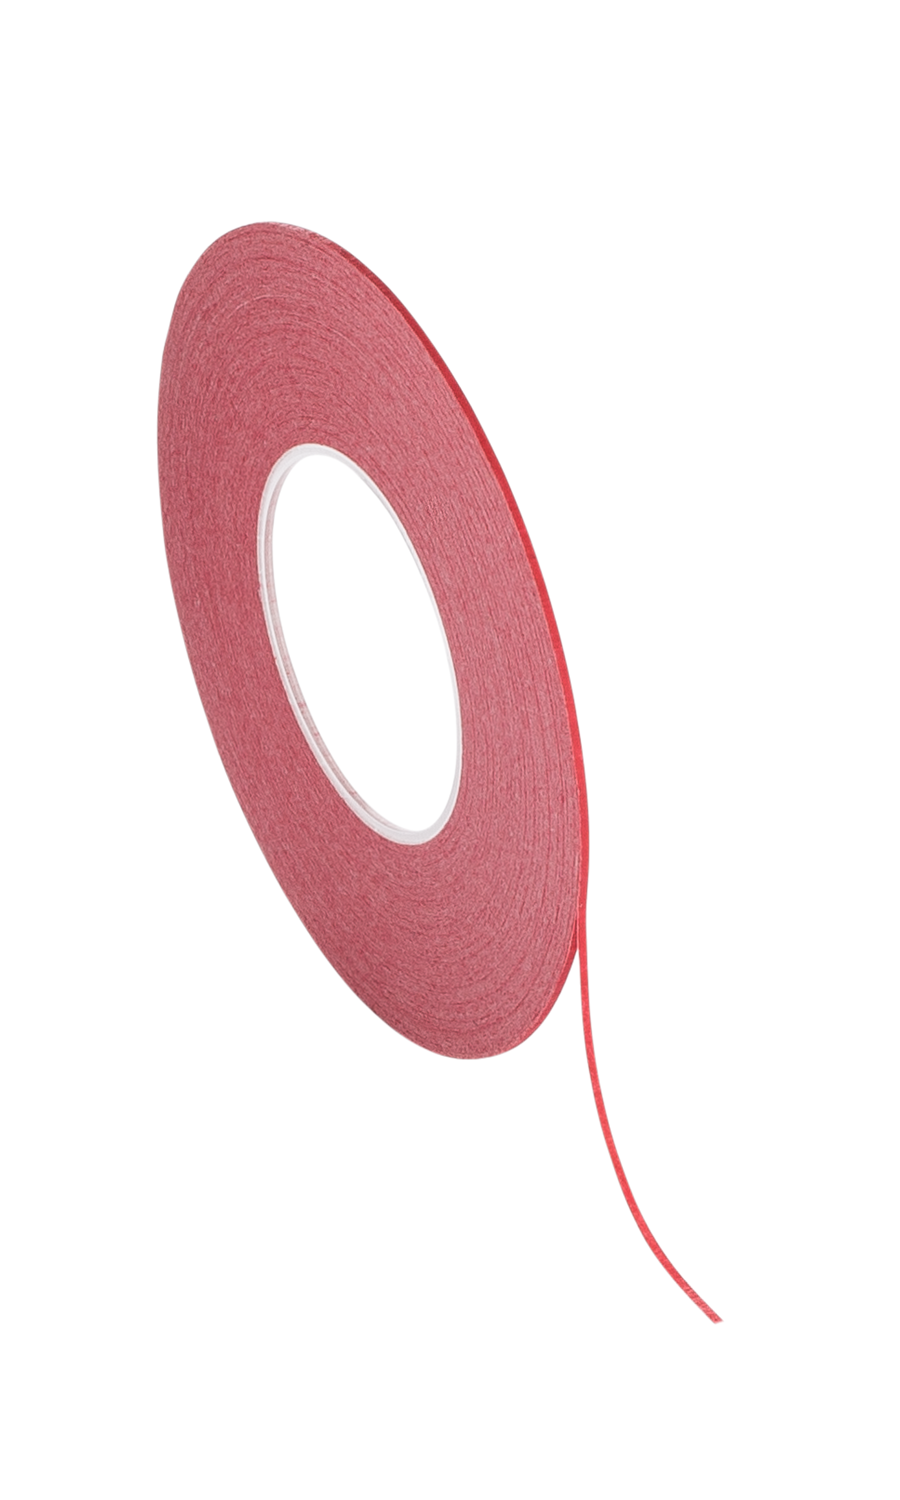 1/32" x 648" Red Crepe Tape